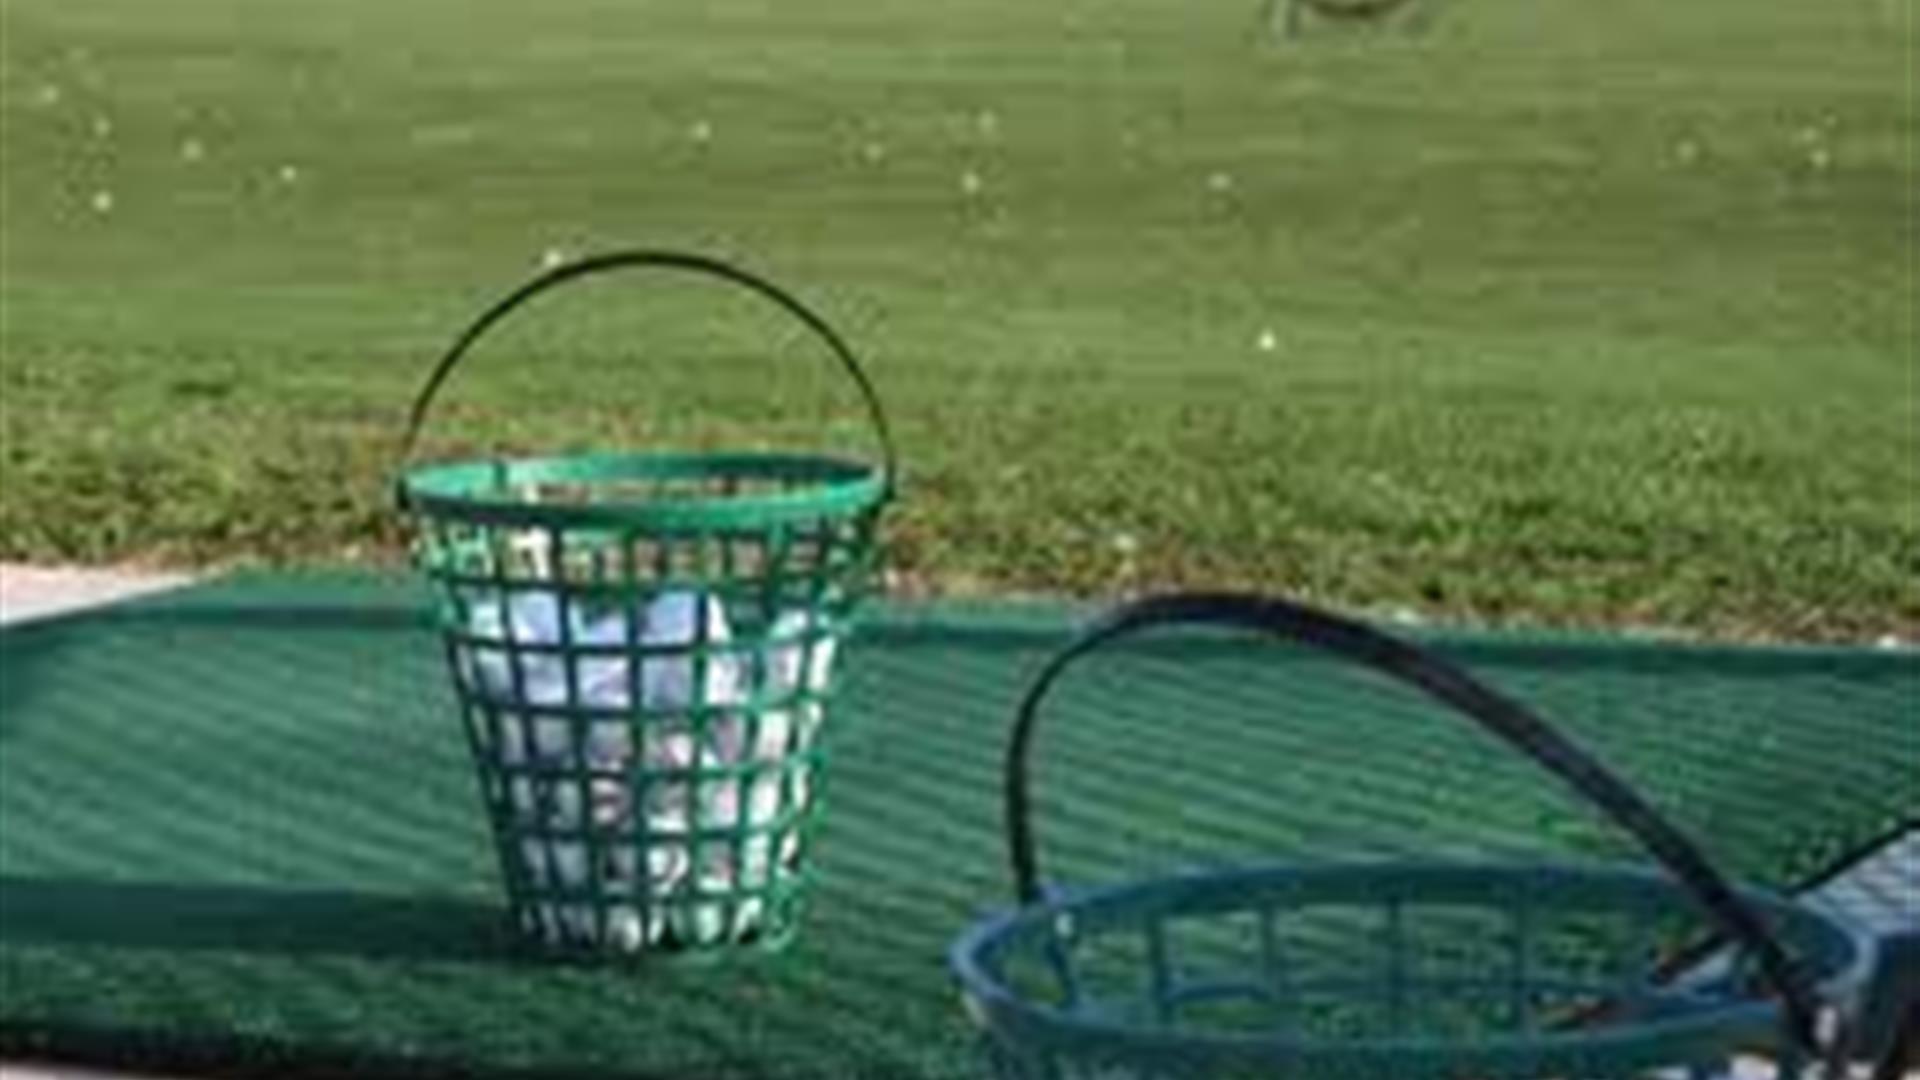 Image of full ball bucket ready for use at the driving range